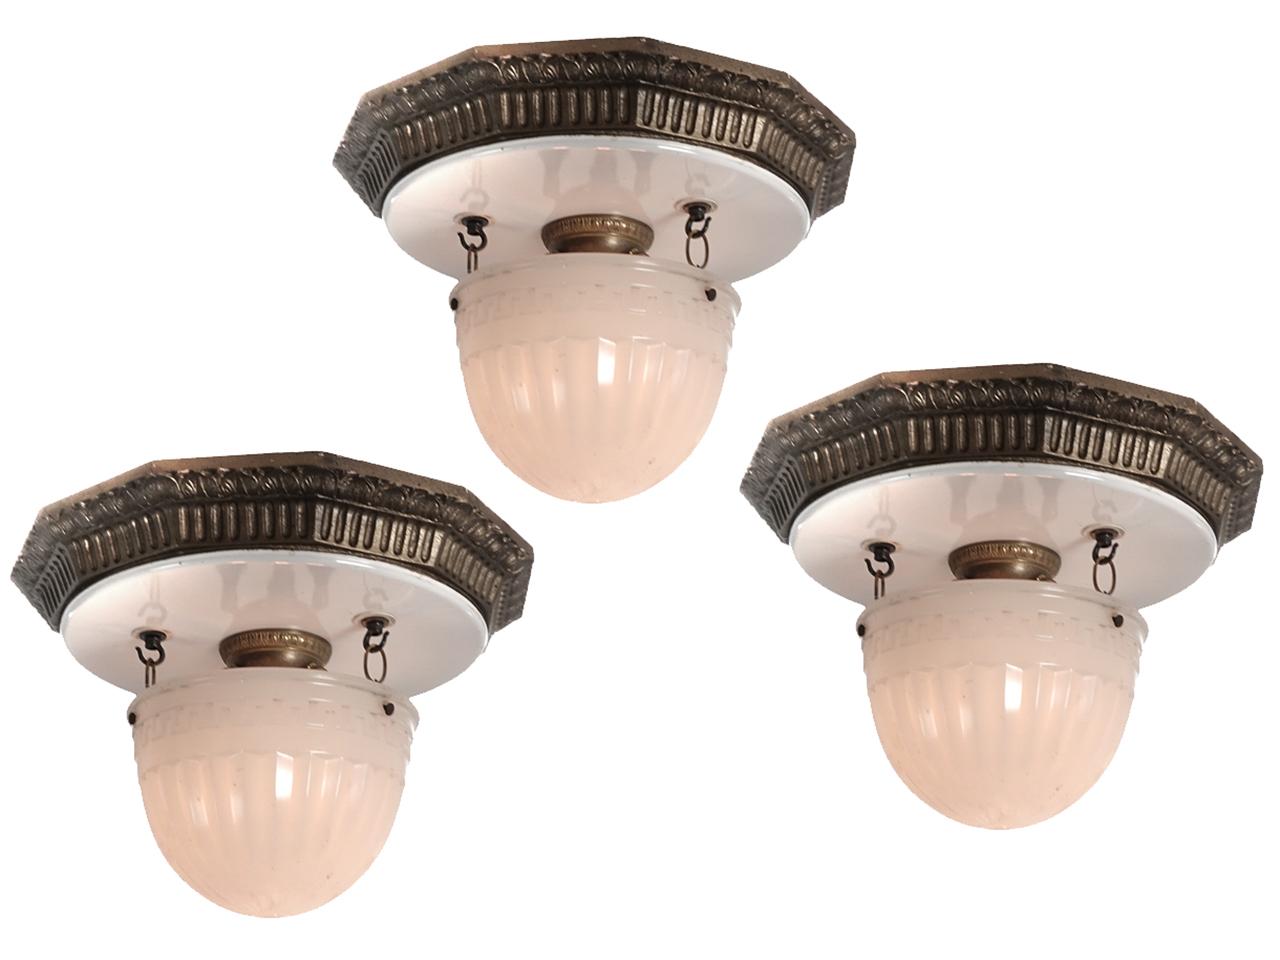 Brascolite fixtures have always been popular because of their quality glass and construction.
The large dome with its fluted and Greek Key pattern is almost .5 in thick. The ceiling crown is white porcelain over steel mounted to a horse hair